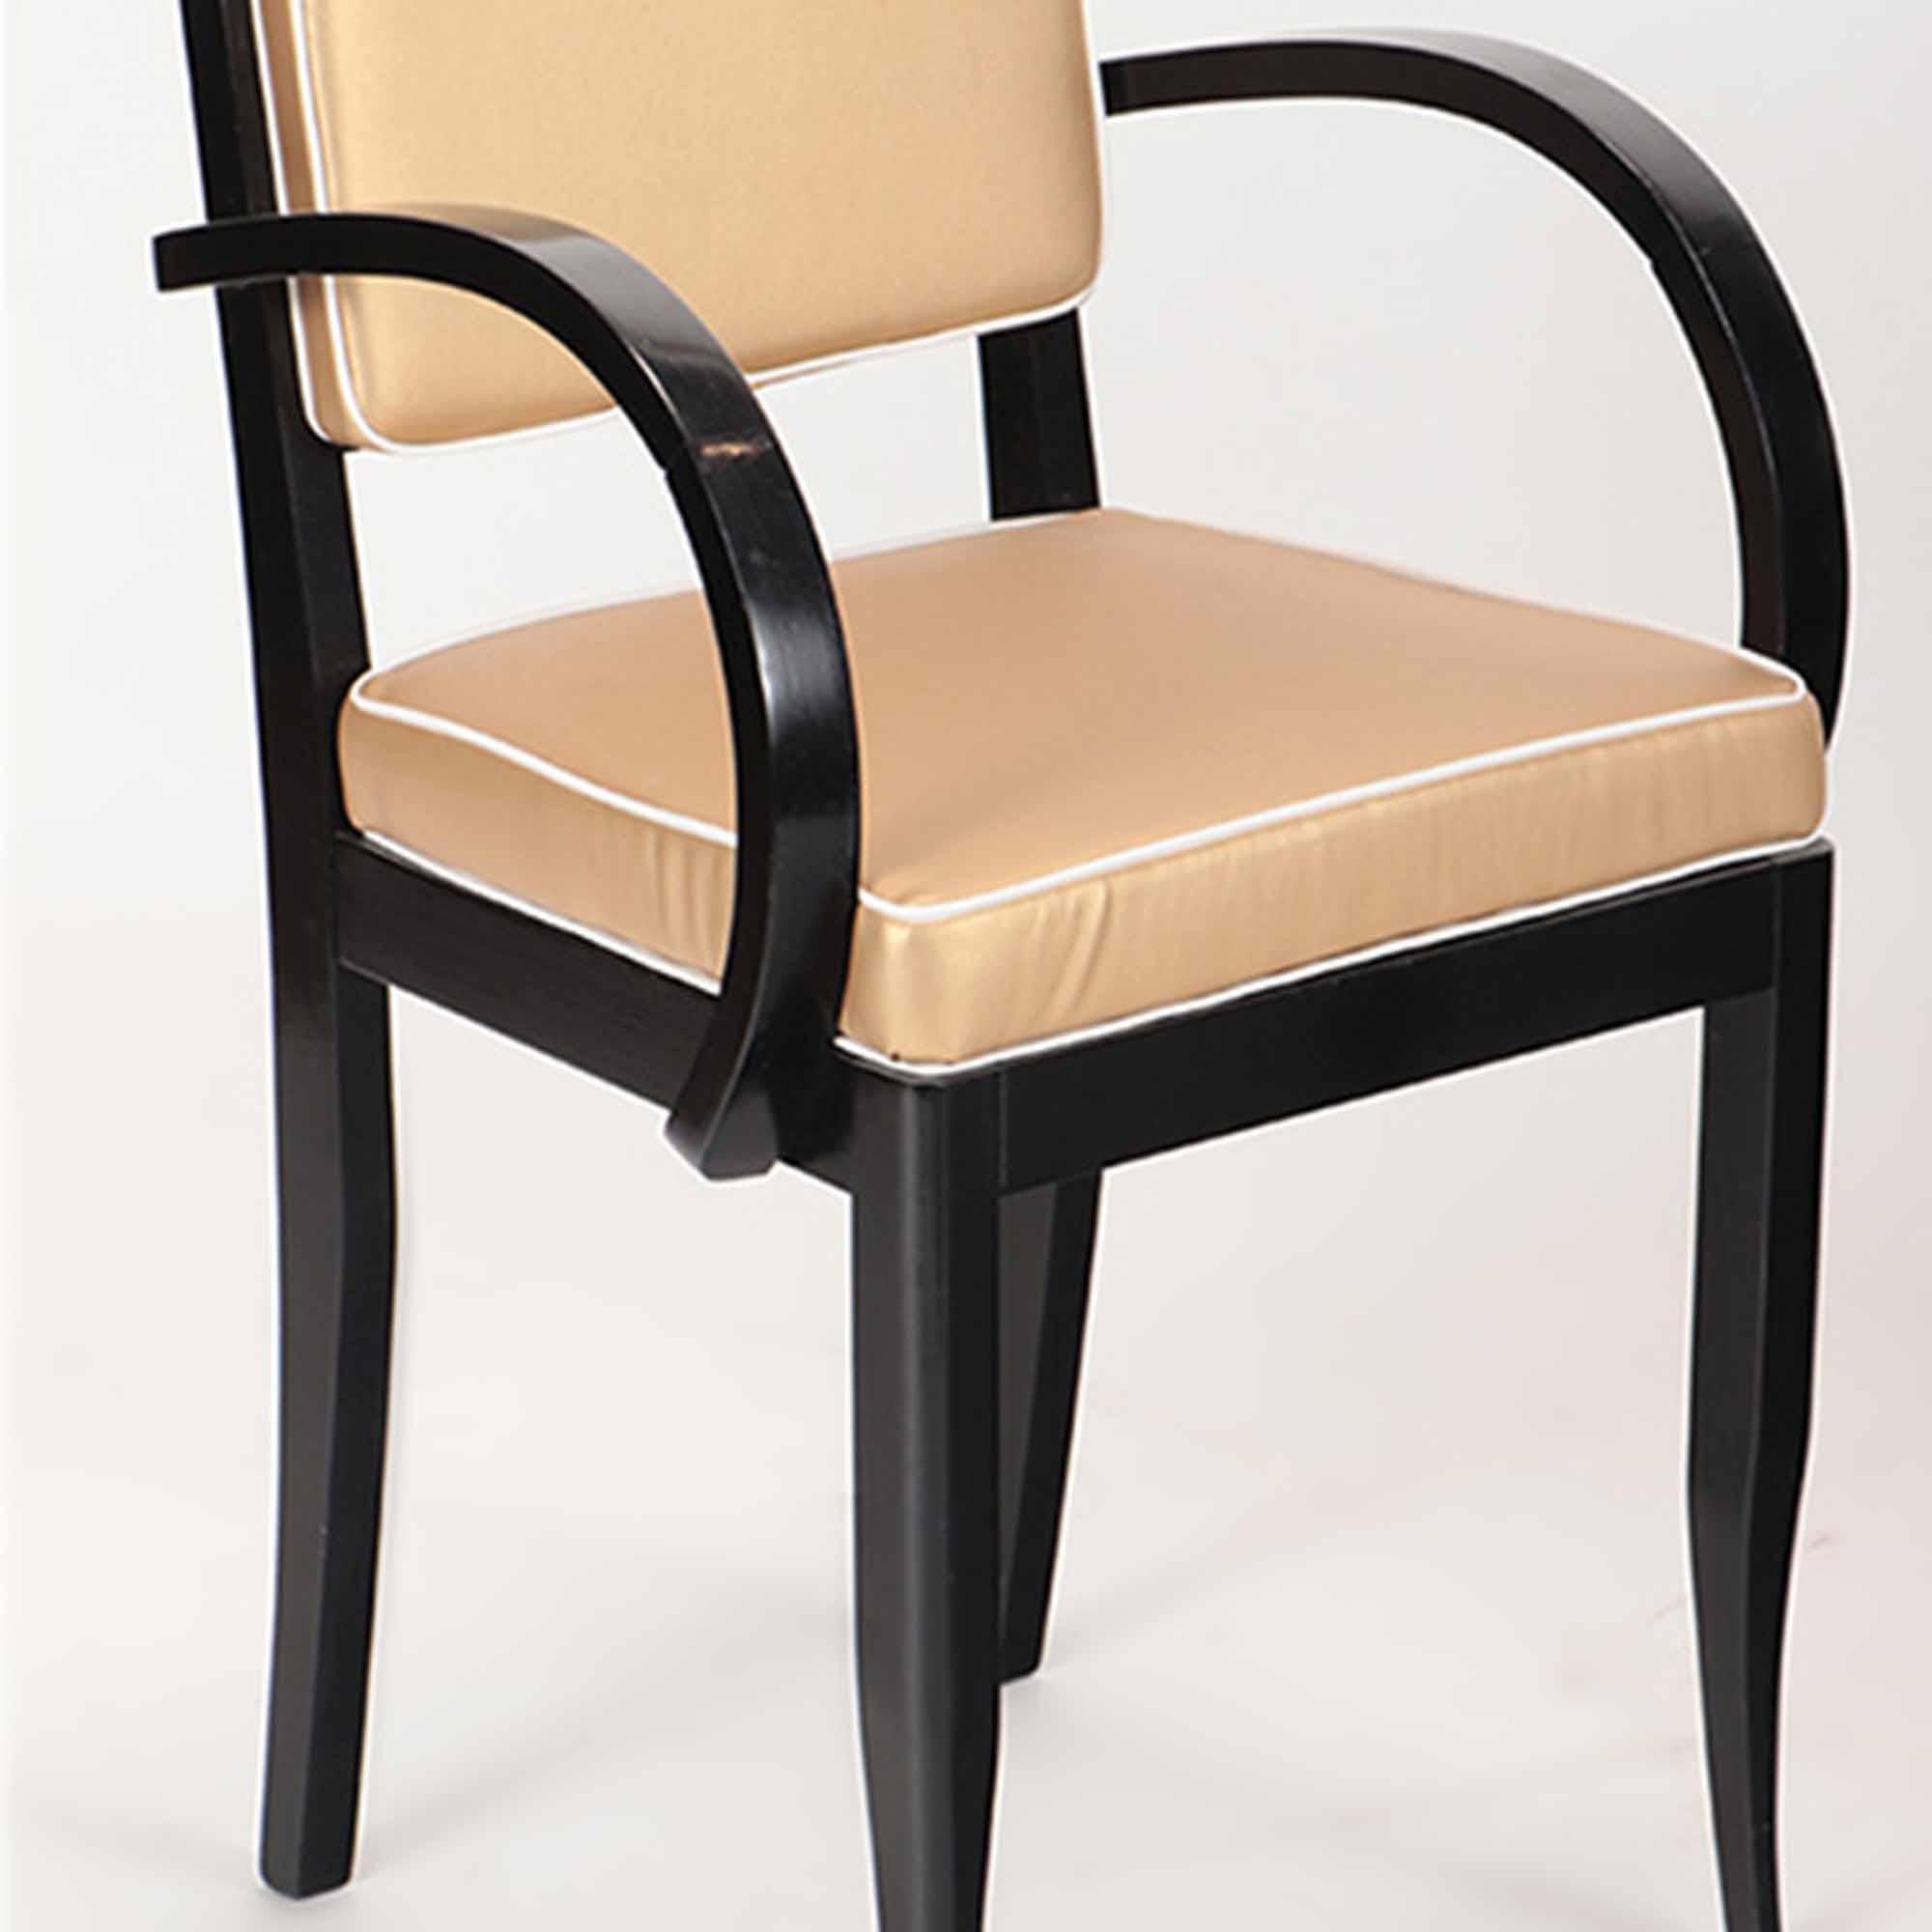 A Pair of Italian ebonized open armchairs with open armrests, circa 1940.